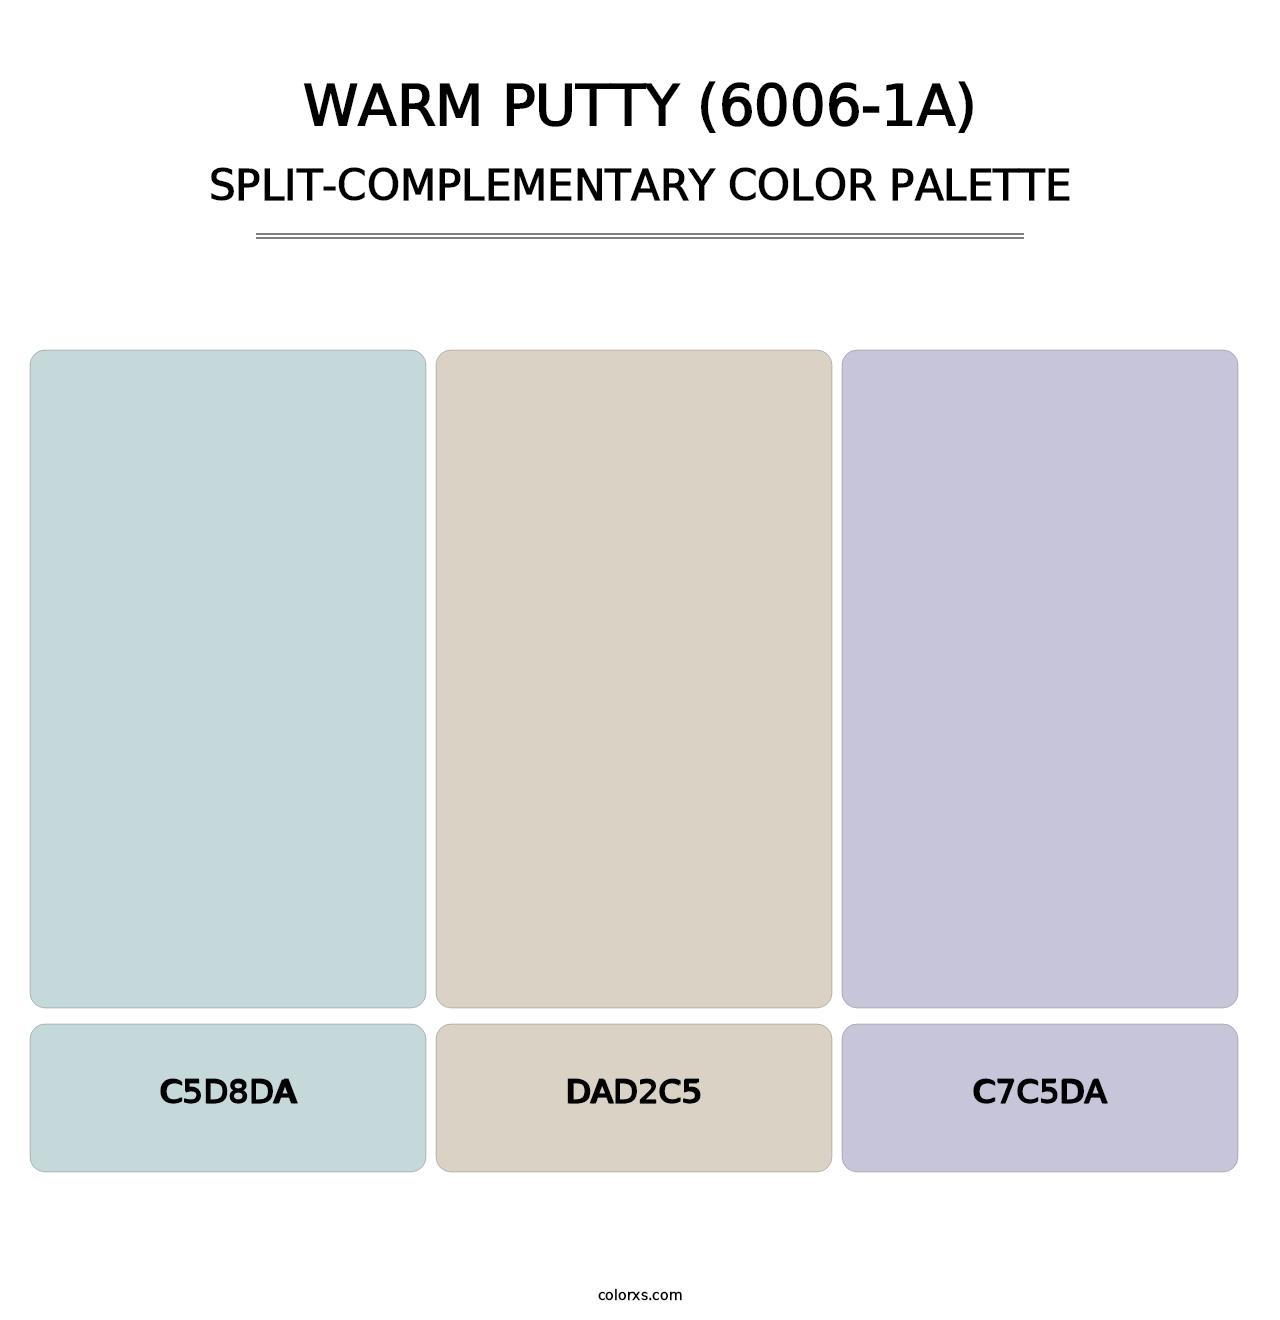 Warm Putty (6006-1A) - Split-Complementary Color Palette